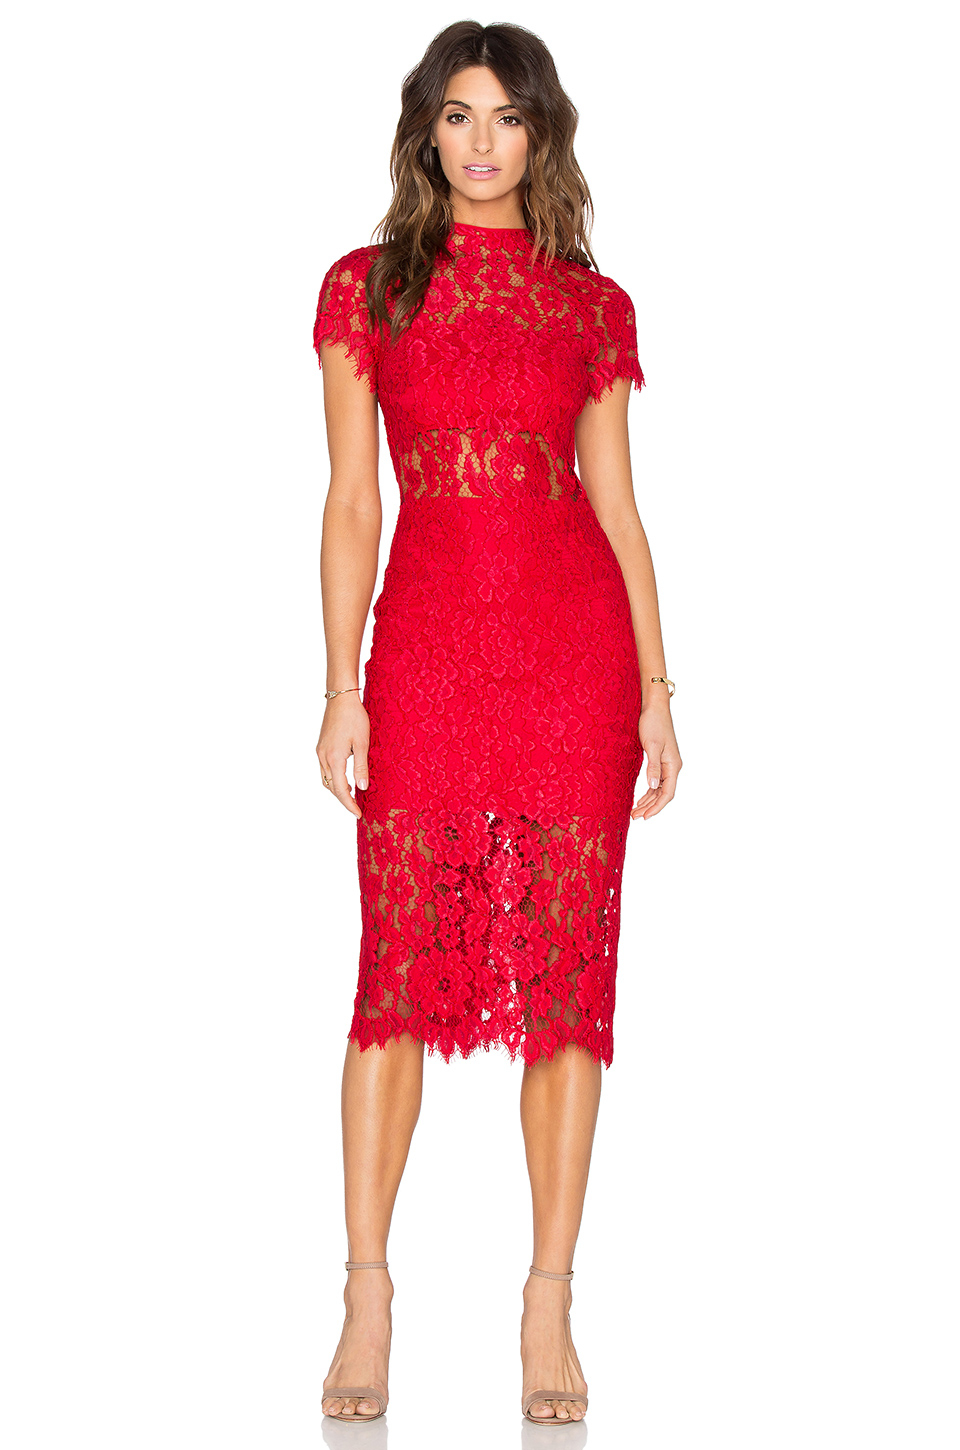 Lyst - Alexis Leona Lace Dress in Red